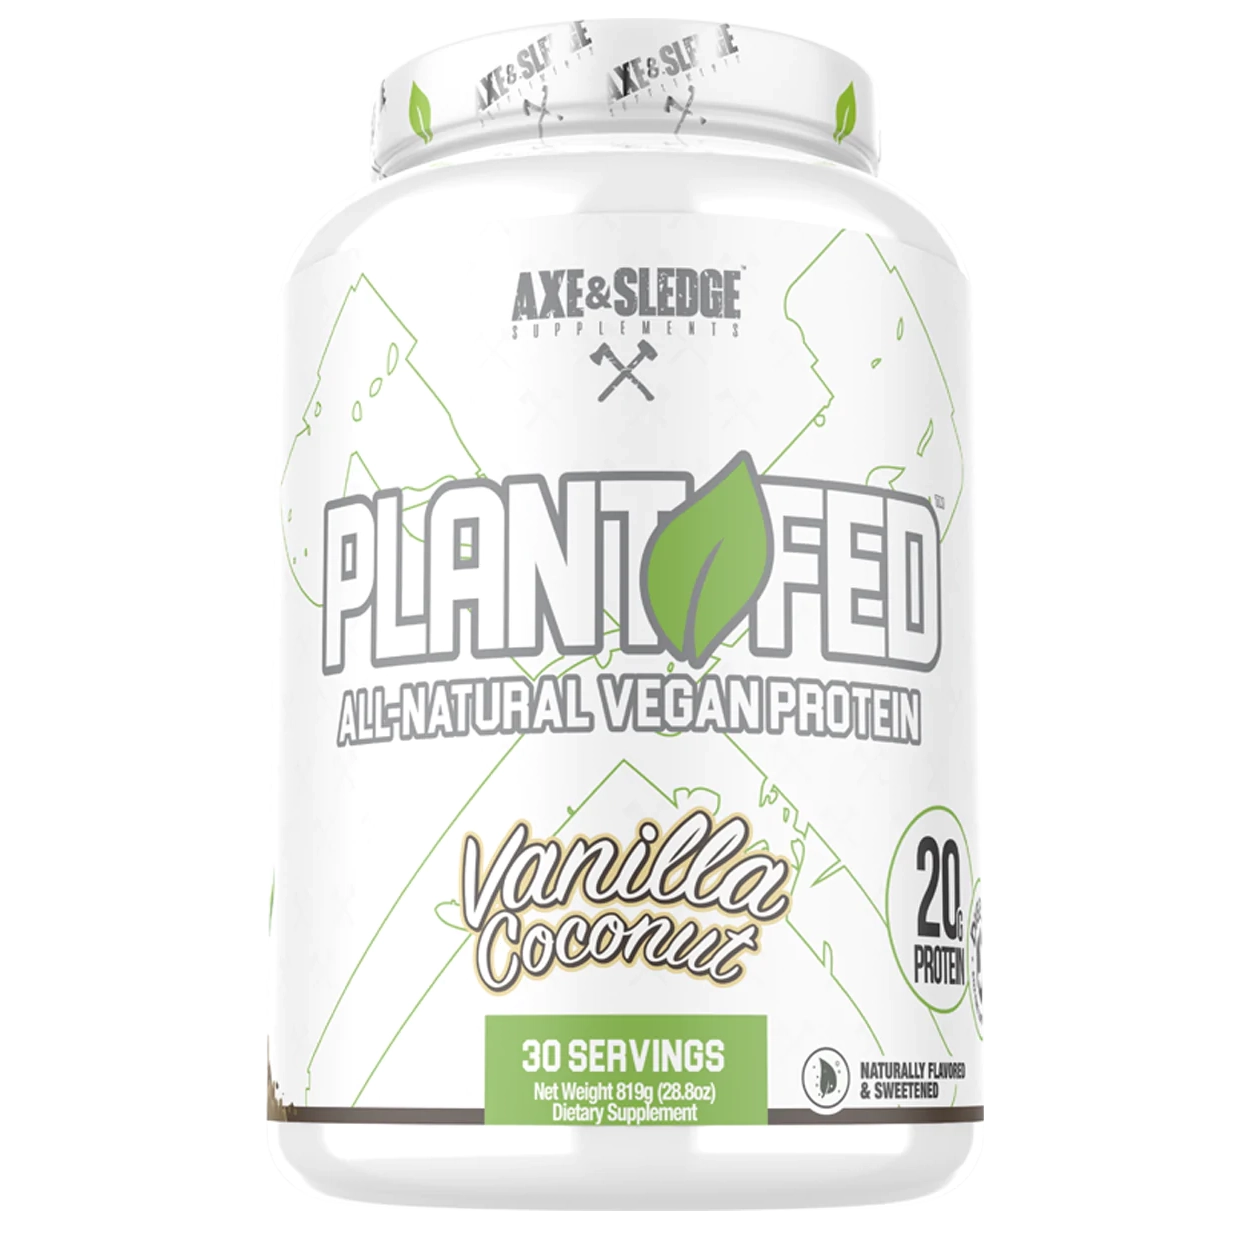 plant fed axe and sledge vegan protein